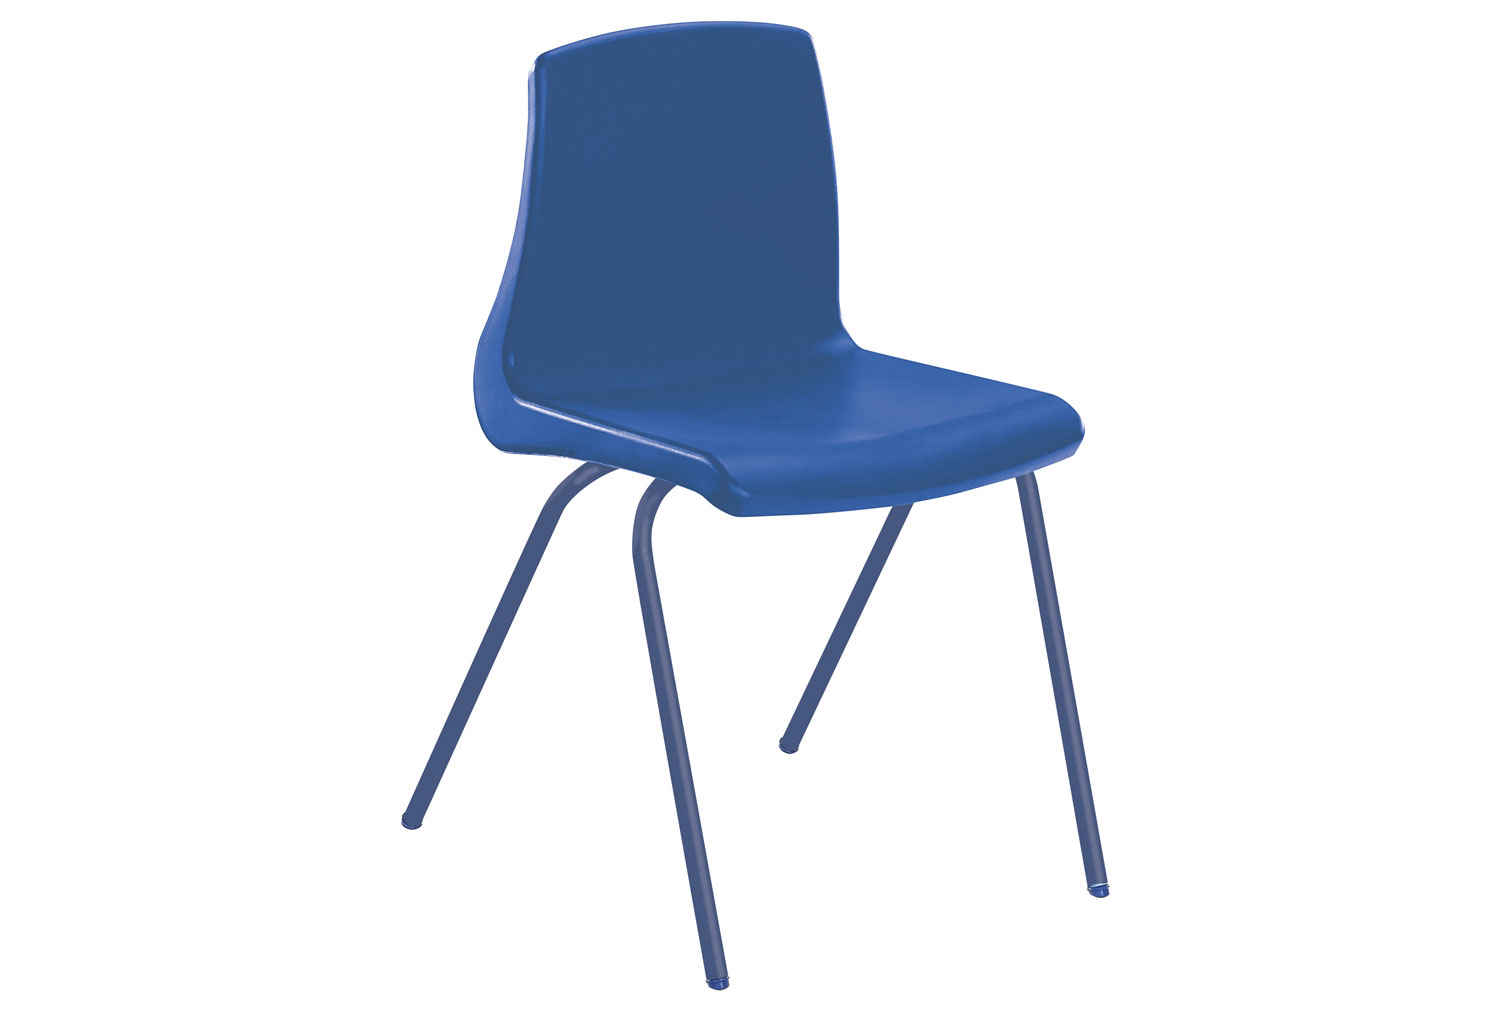 Qty 13 - Metalliform NP Classroom Chairs Colour Edition, 6-8 Years - 36wx32dx35h (cm), Charcoal Frame, Blue